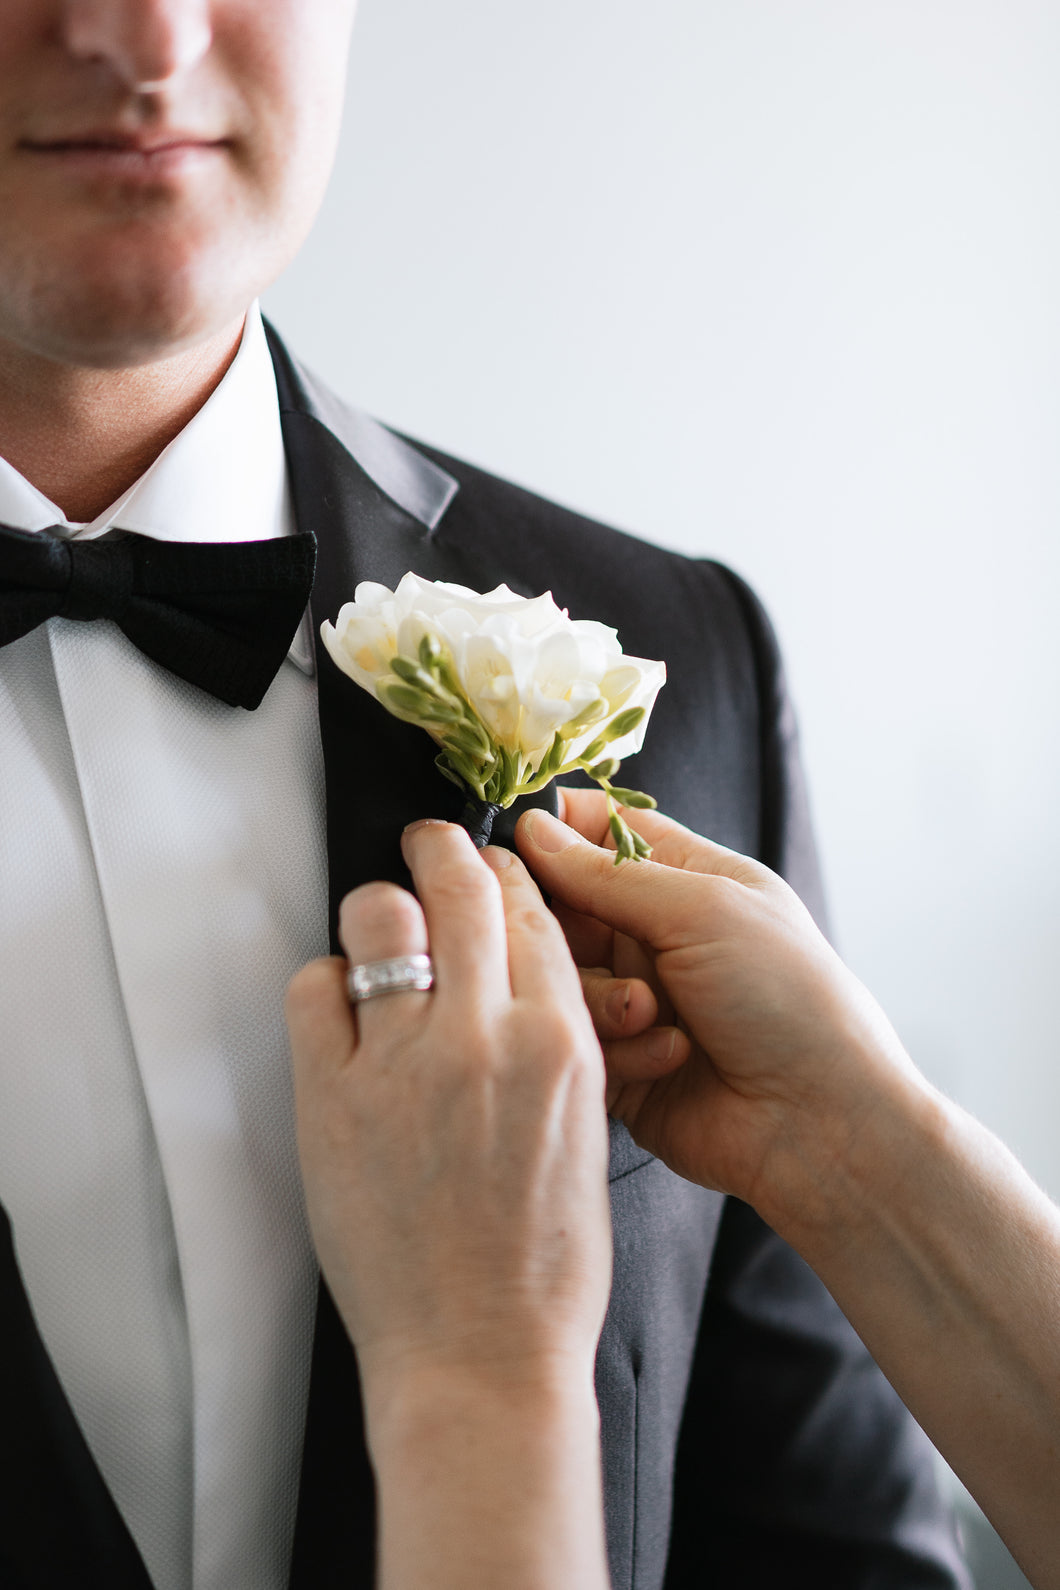 Groom being pinned by Kate hill the florist with a buttonhole. Black tie jacket suite lapel with white freesia buttonhole.